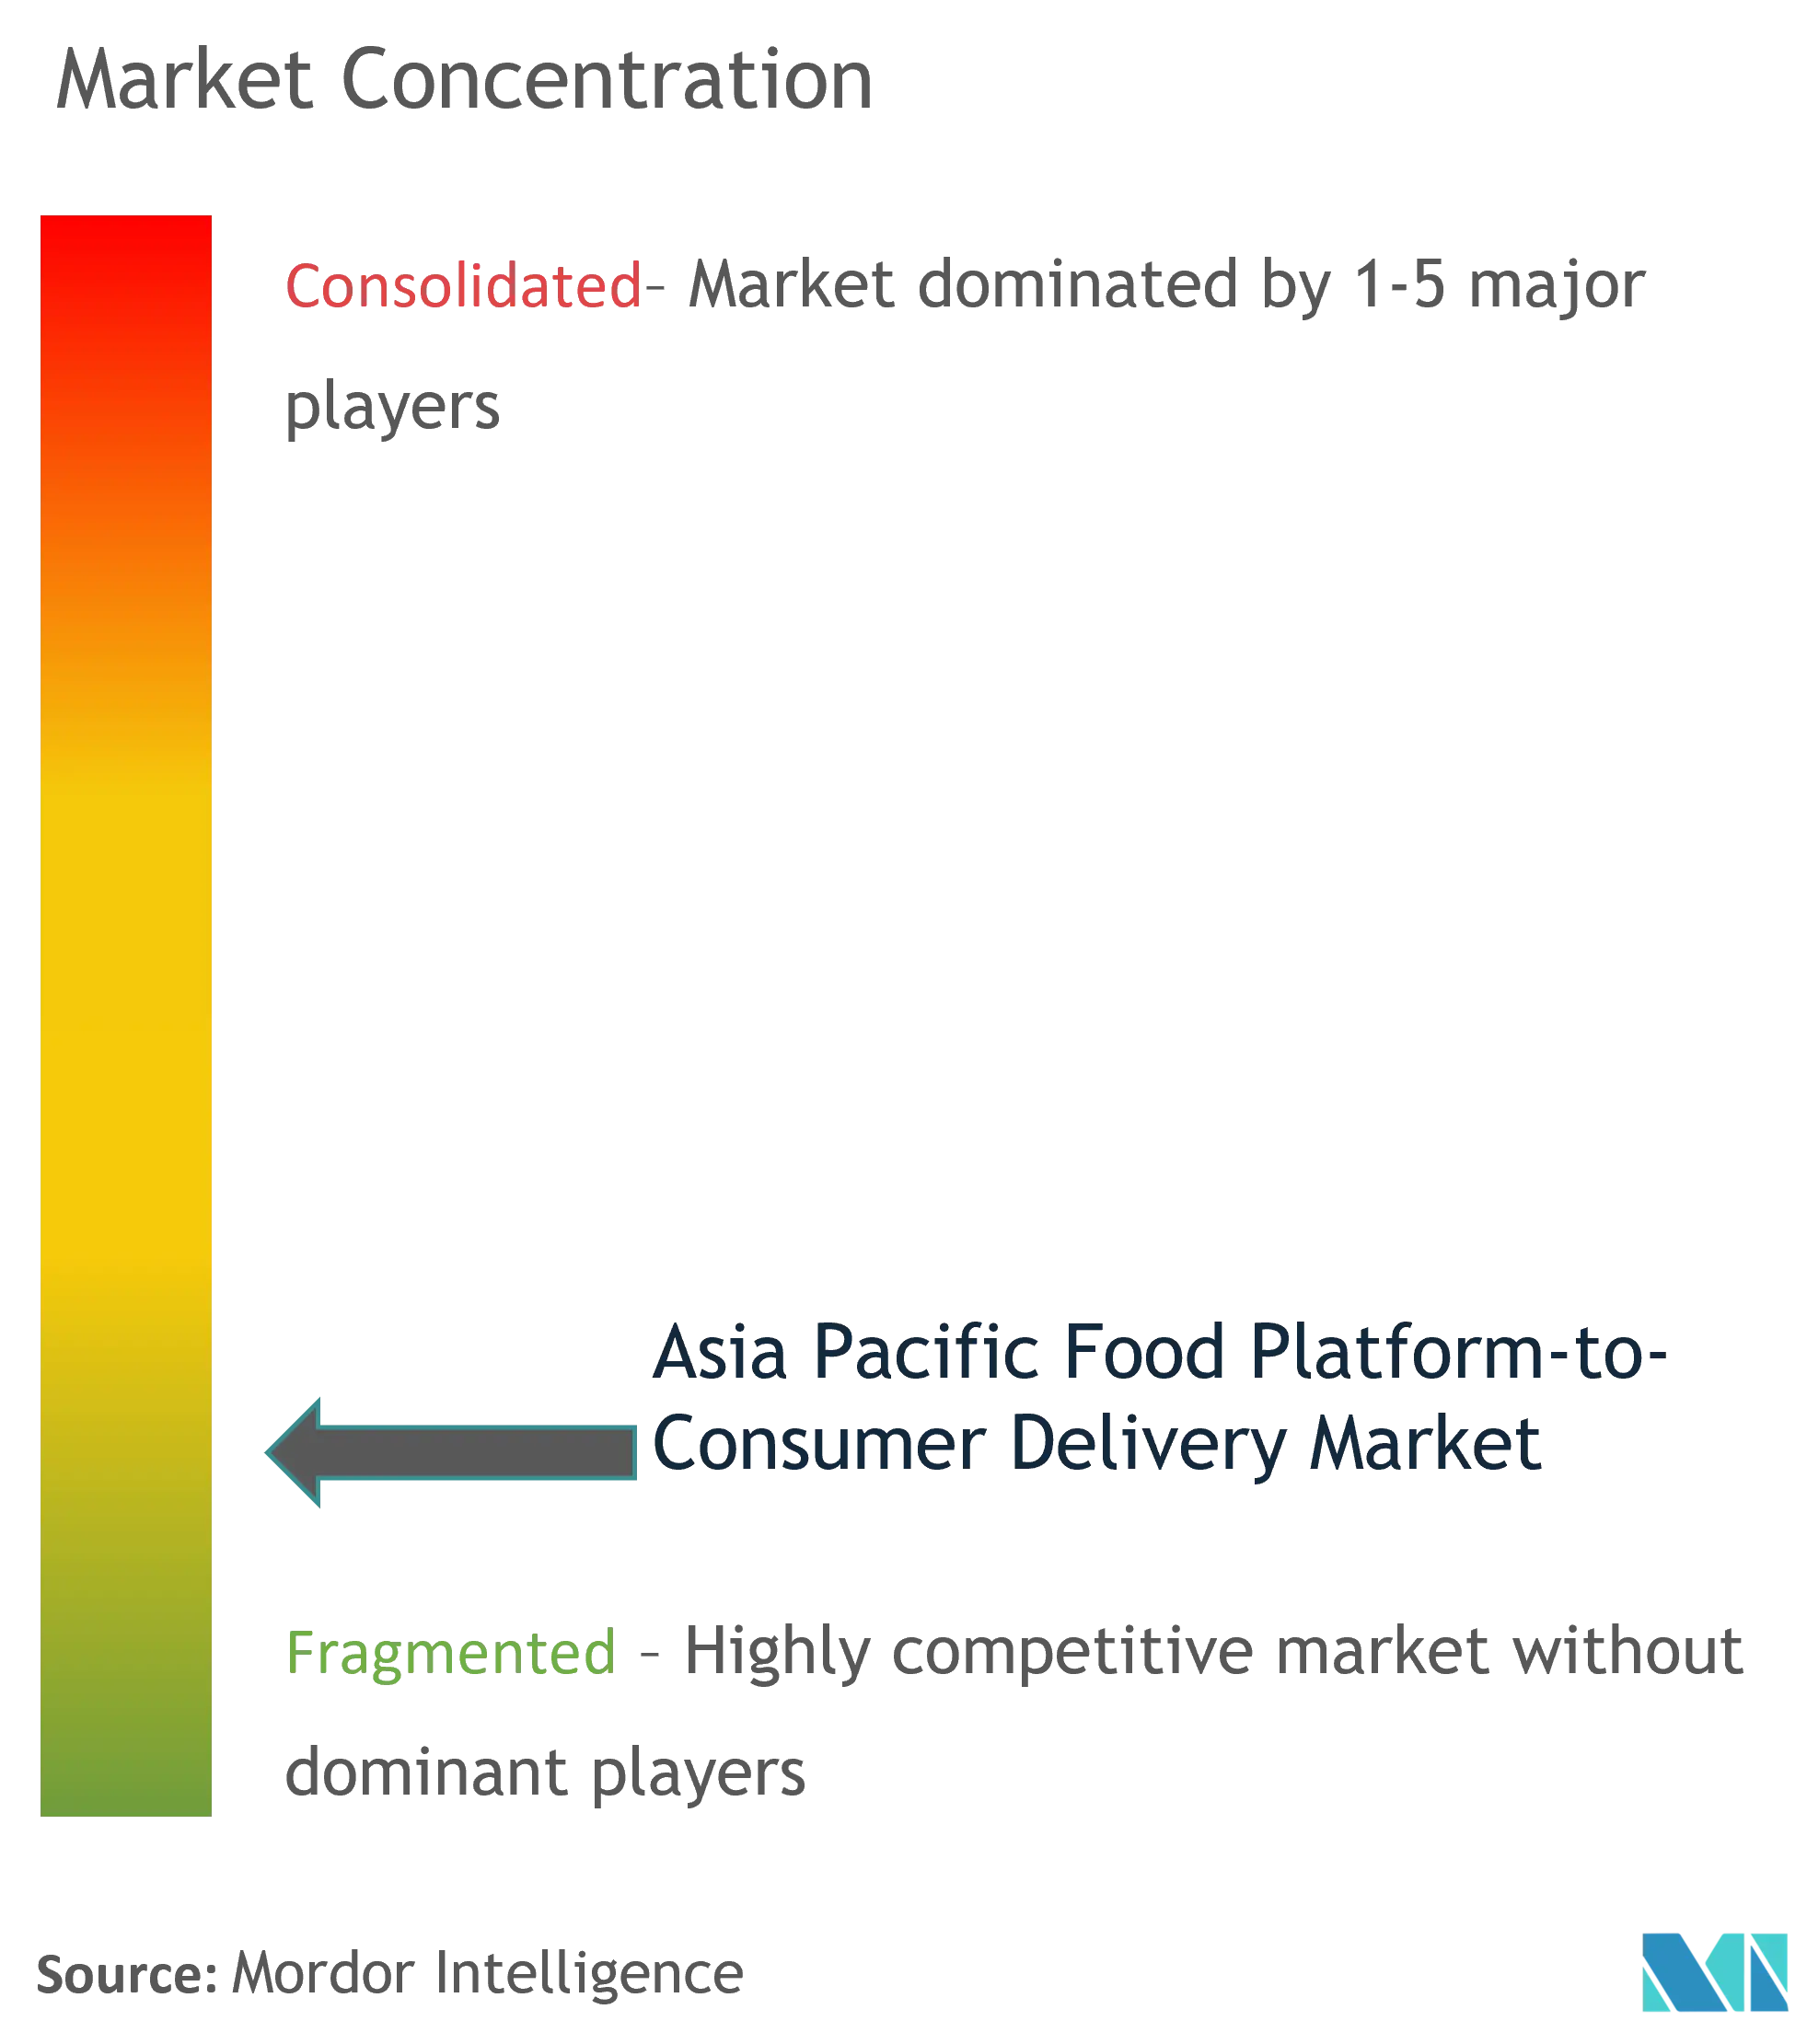 Asia Pacific Food Platform-to-Consumer Delivery Market Concentration